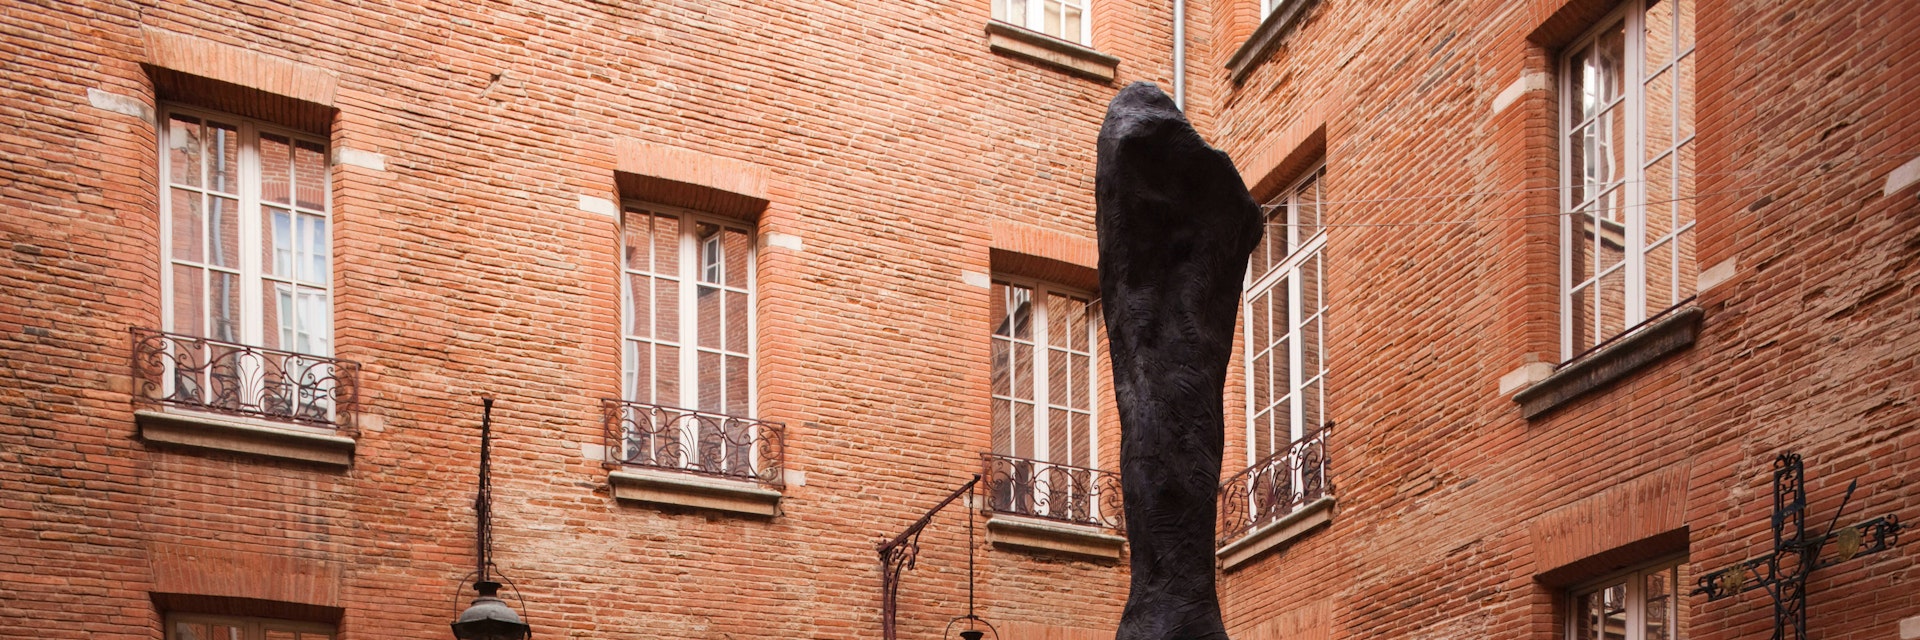 Musee Paul Dupuy museum, exterior and sculpture, Leg of a Horse by Daniel Coulet